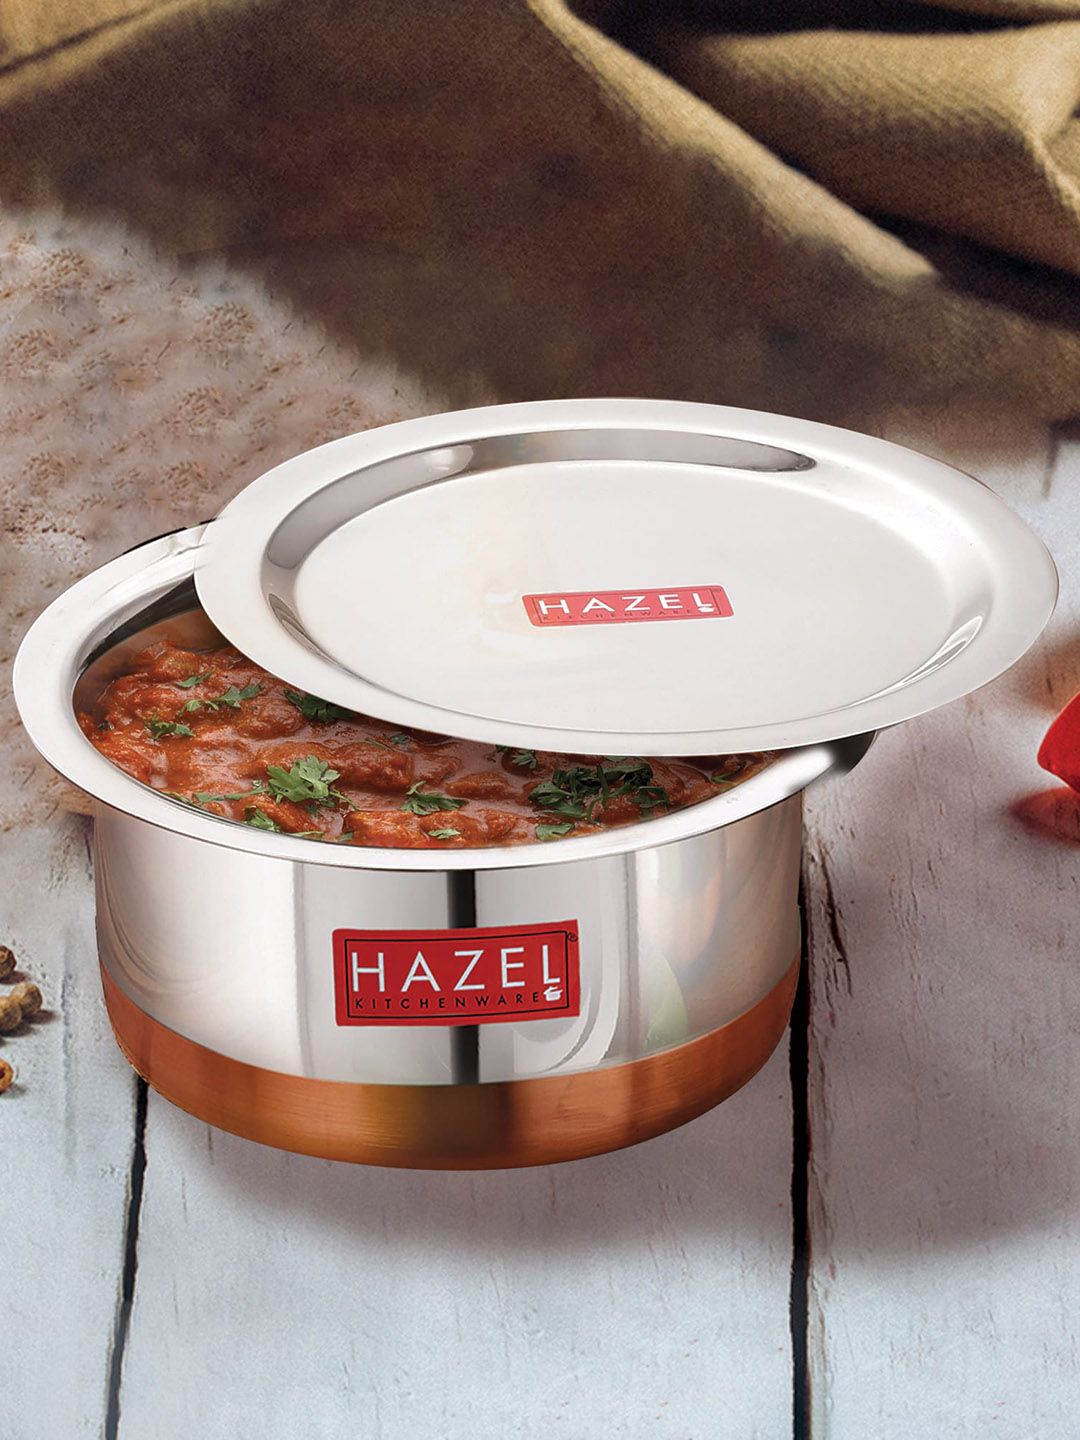 HAZEL Silver-Toned Stainless Steel Tope With Lid Price in India